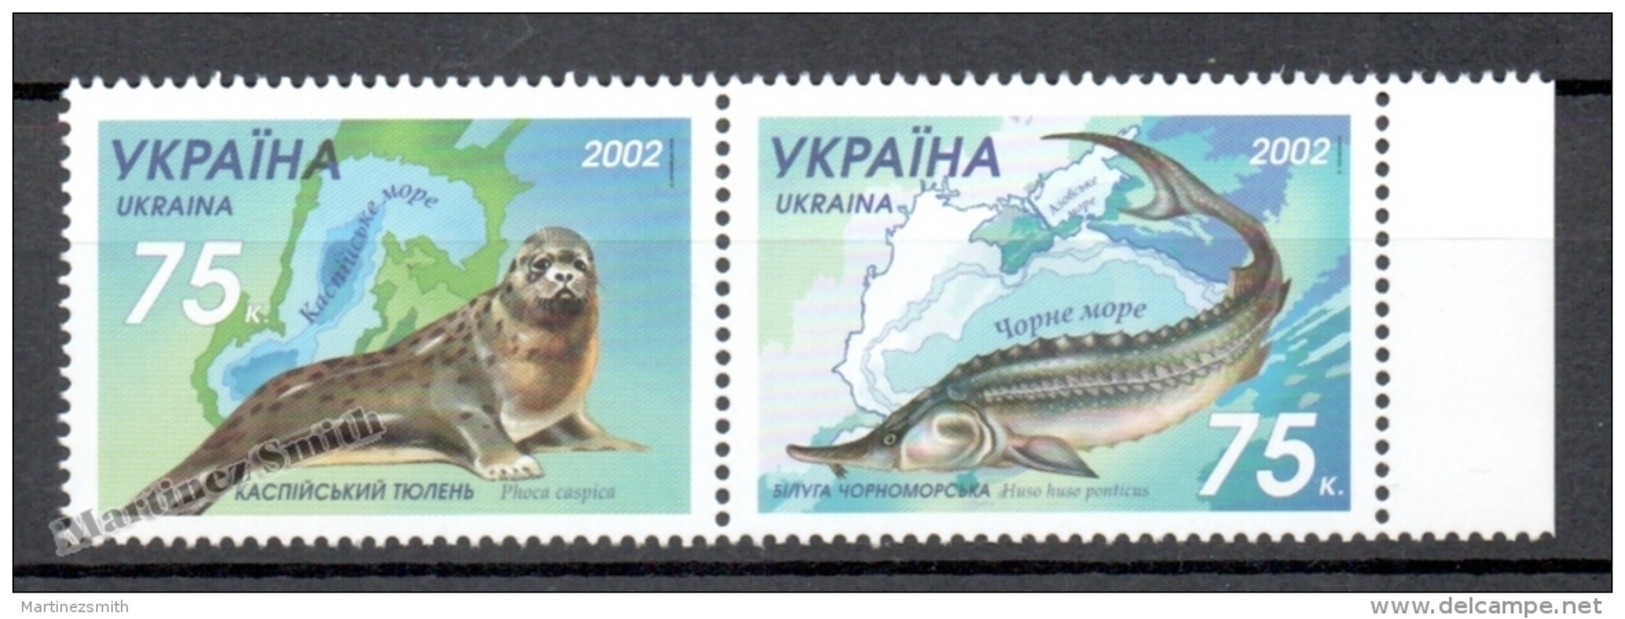 Ukraine 2002 Yvert 475-476, Fauna Protection. The Red Book Of Ukraine. Joint Issue With Kazakhstan - MNH - Ucrania